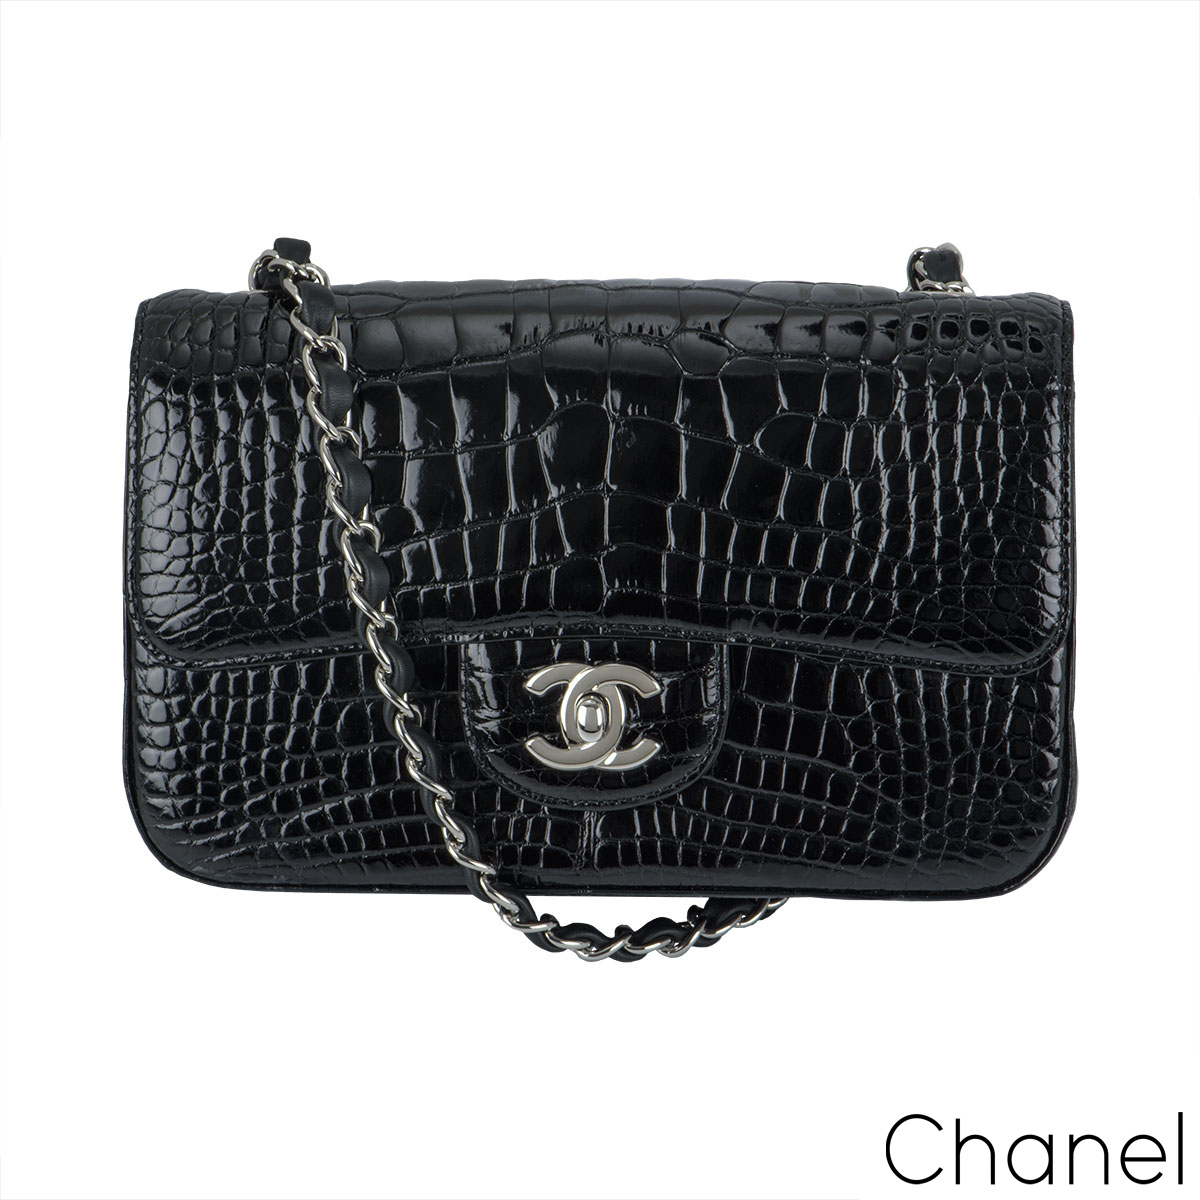 Second hand designer bags, Pre-owned luxury bags